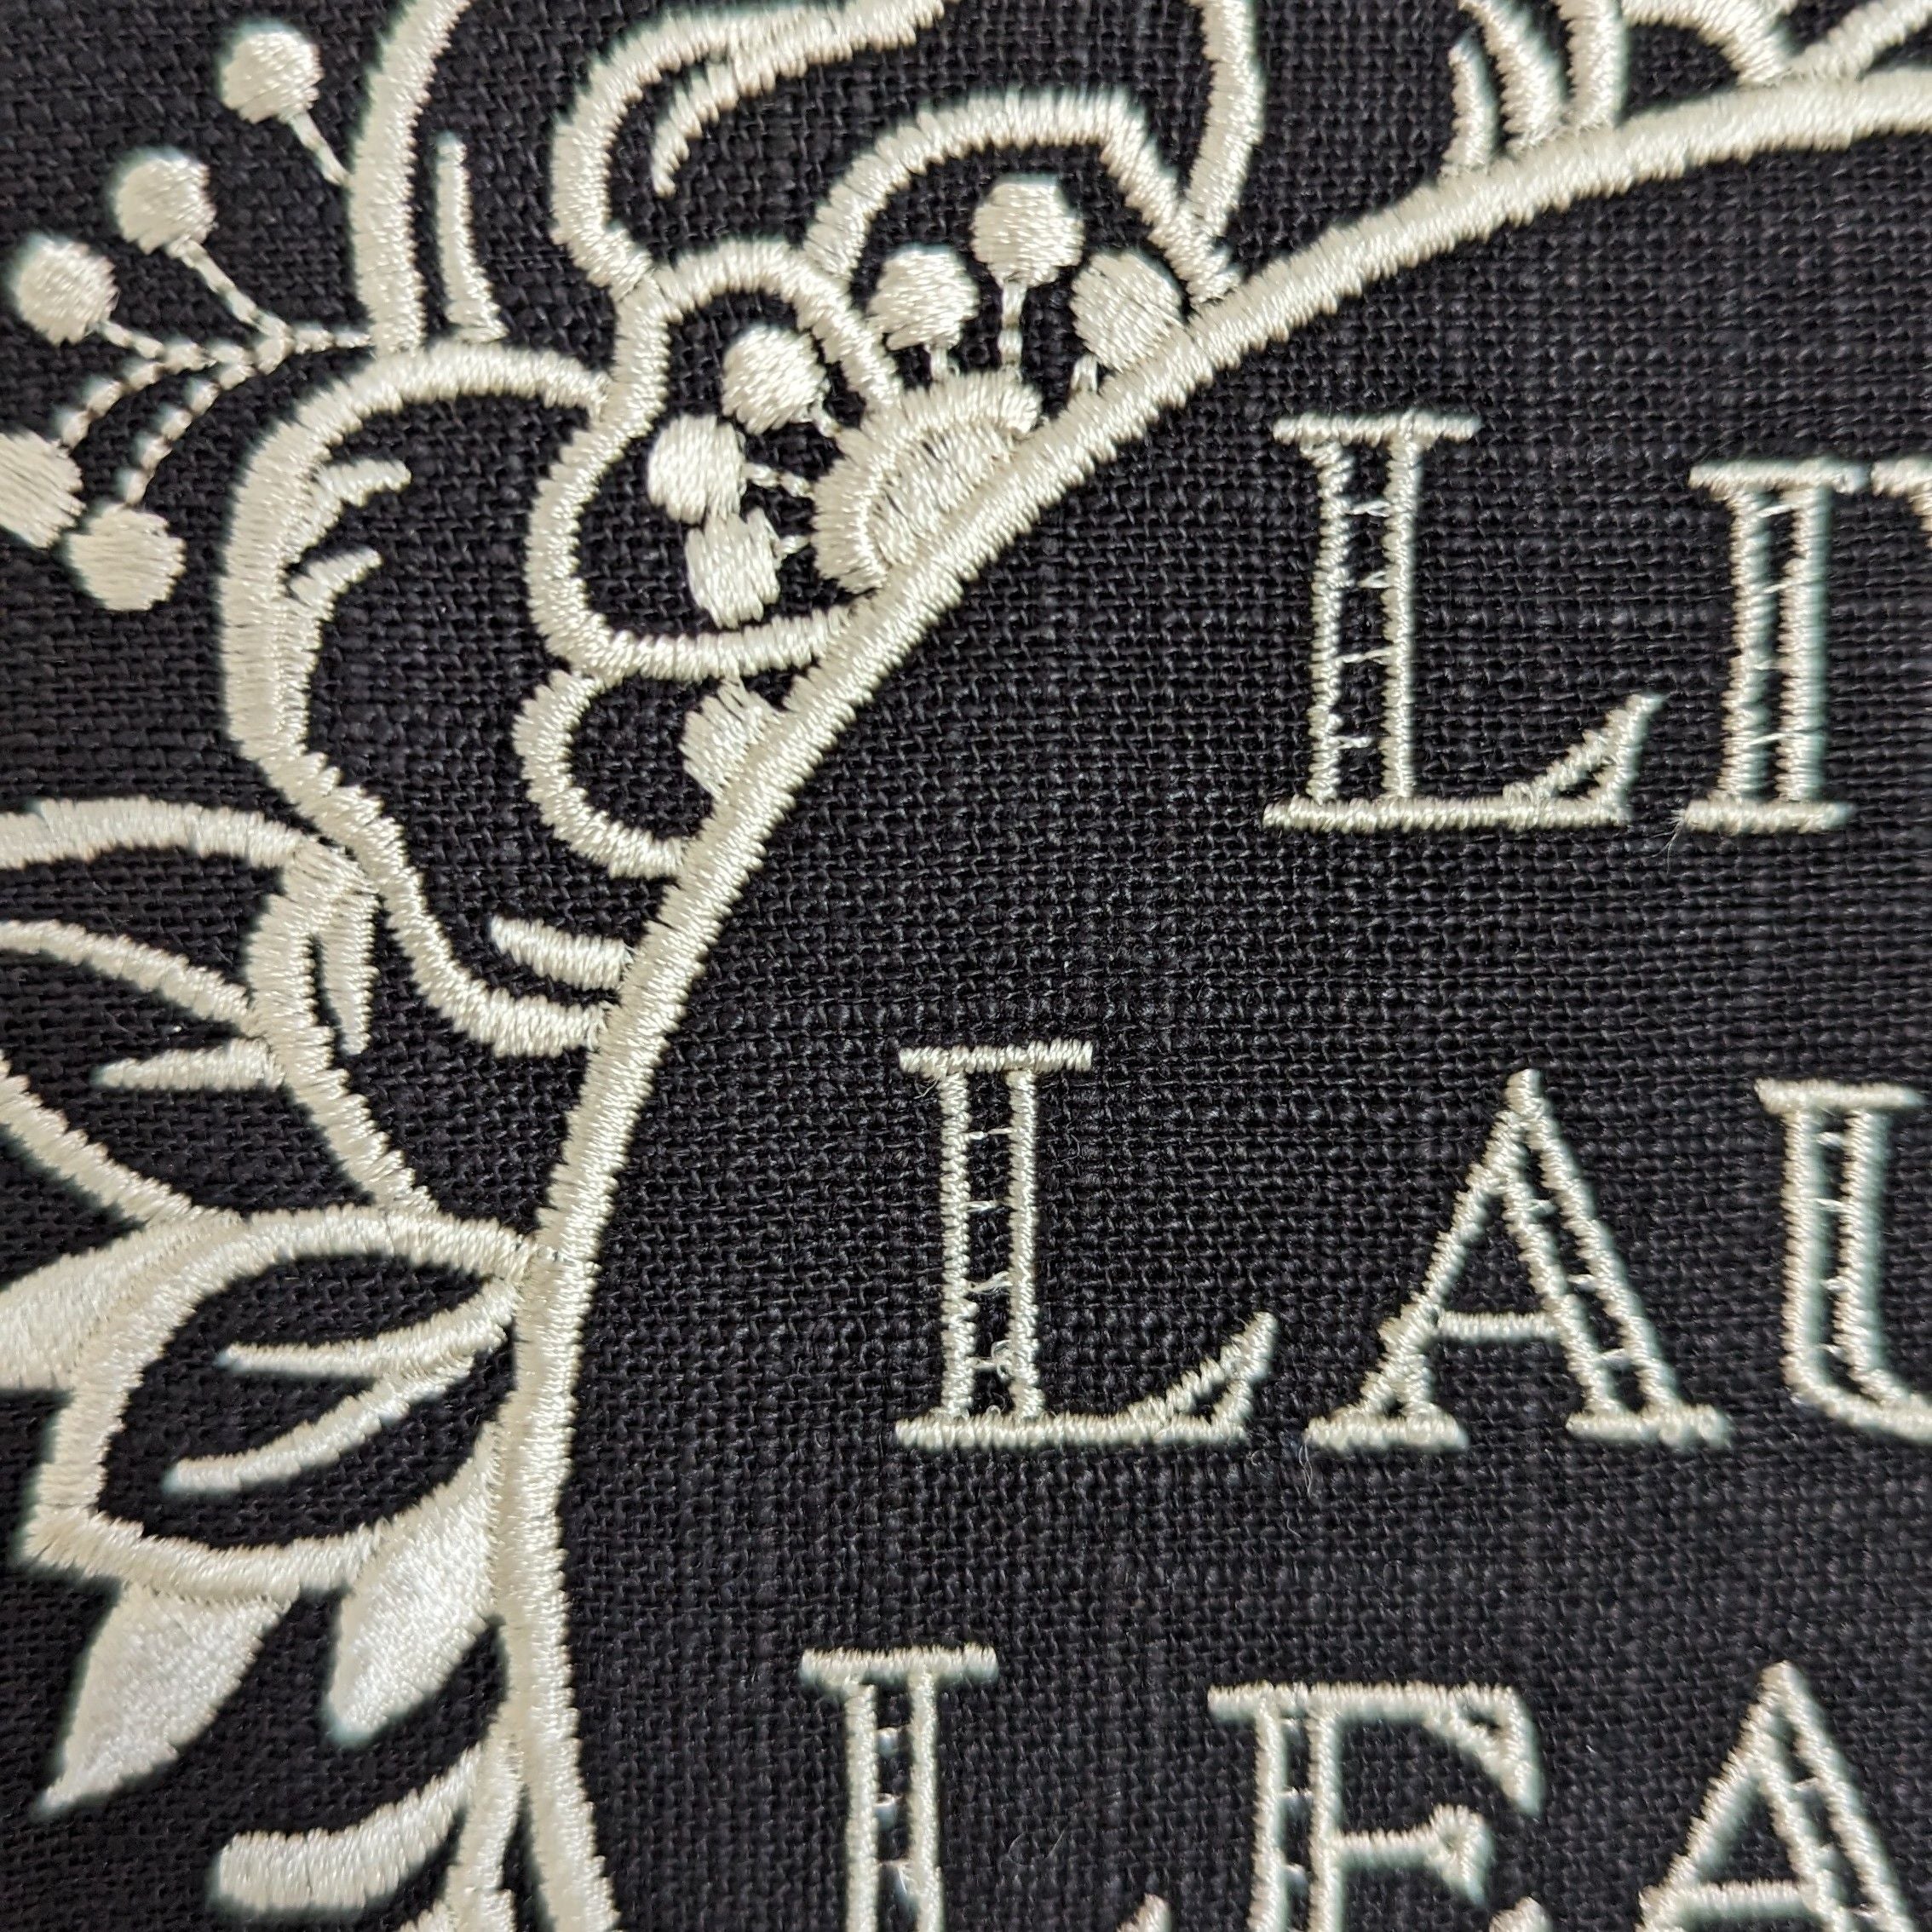 Live Laugh Leave by nine. Machine embroidery 8" hoop art